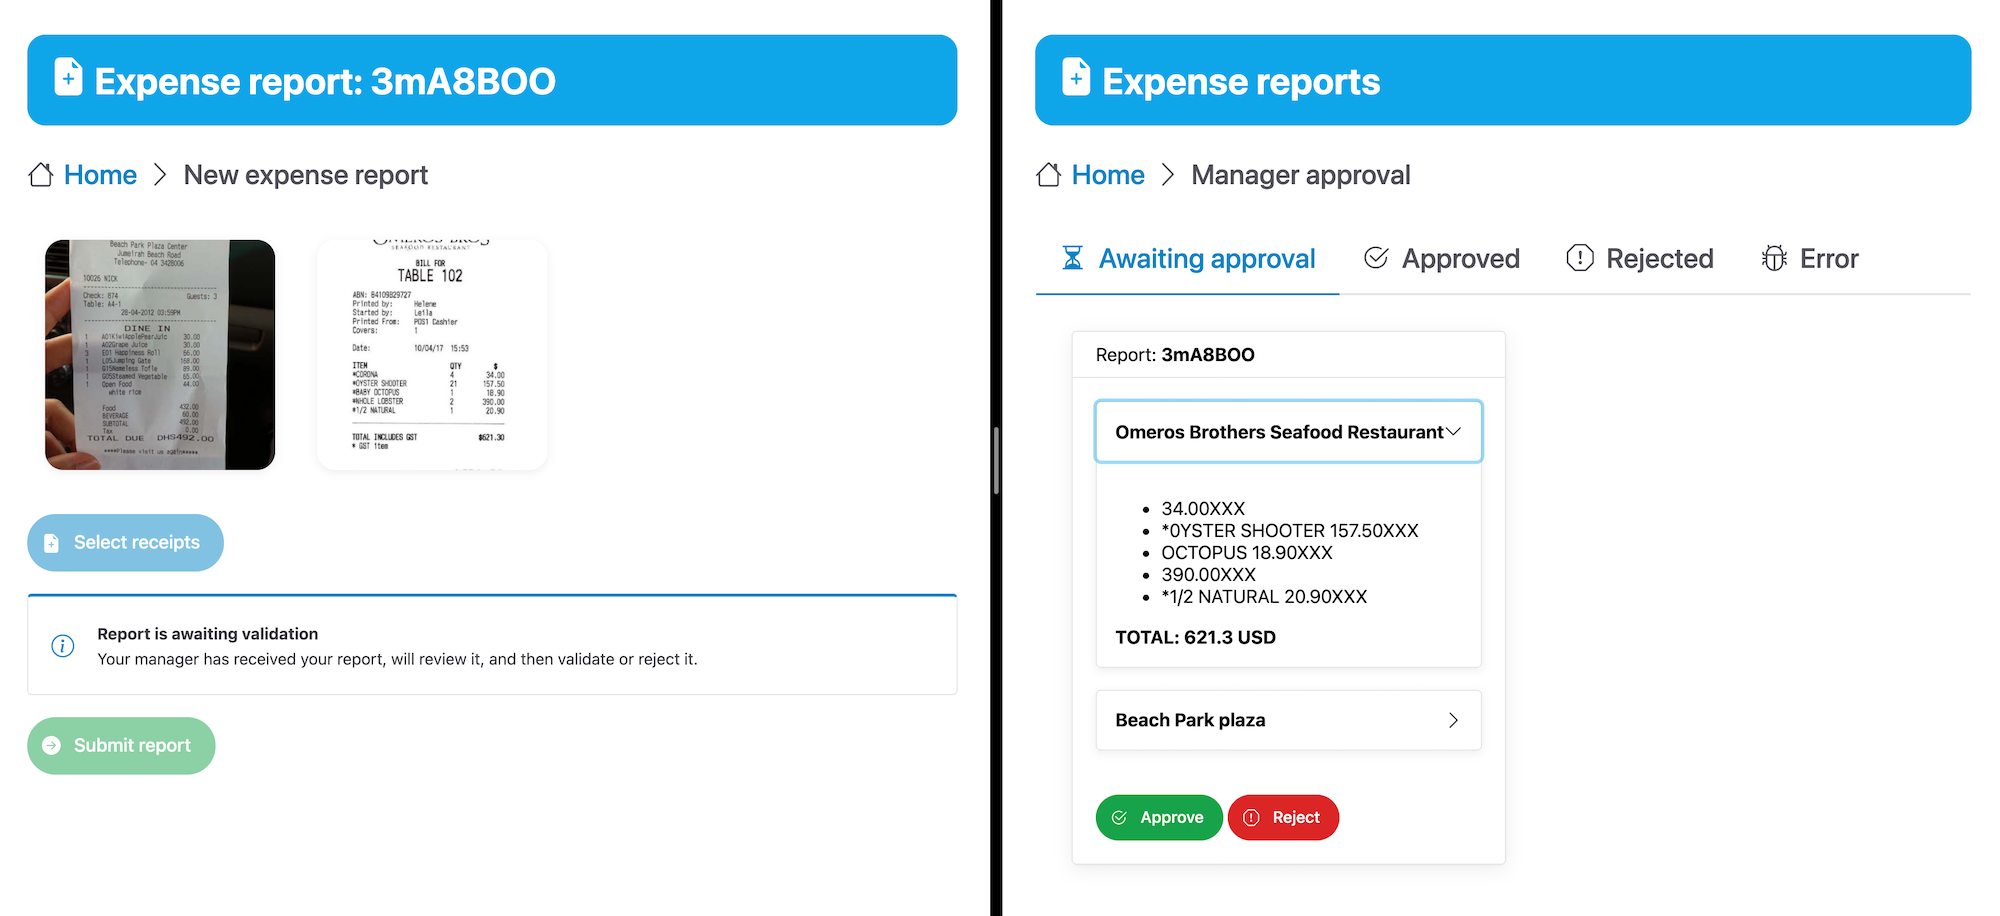 Employee and manager expense report screens